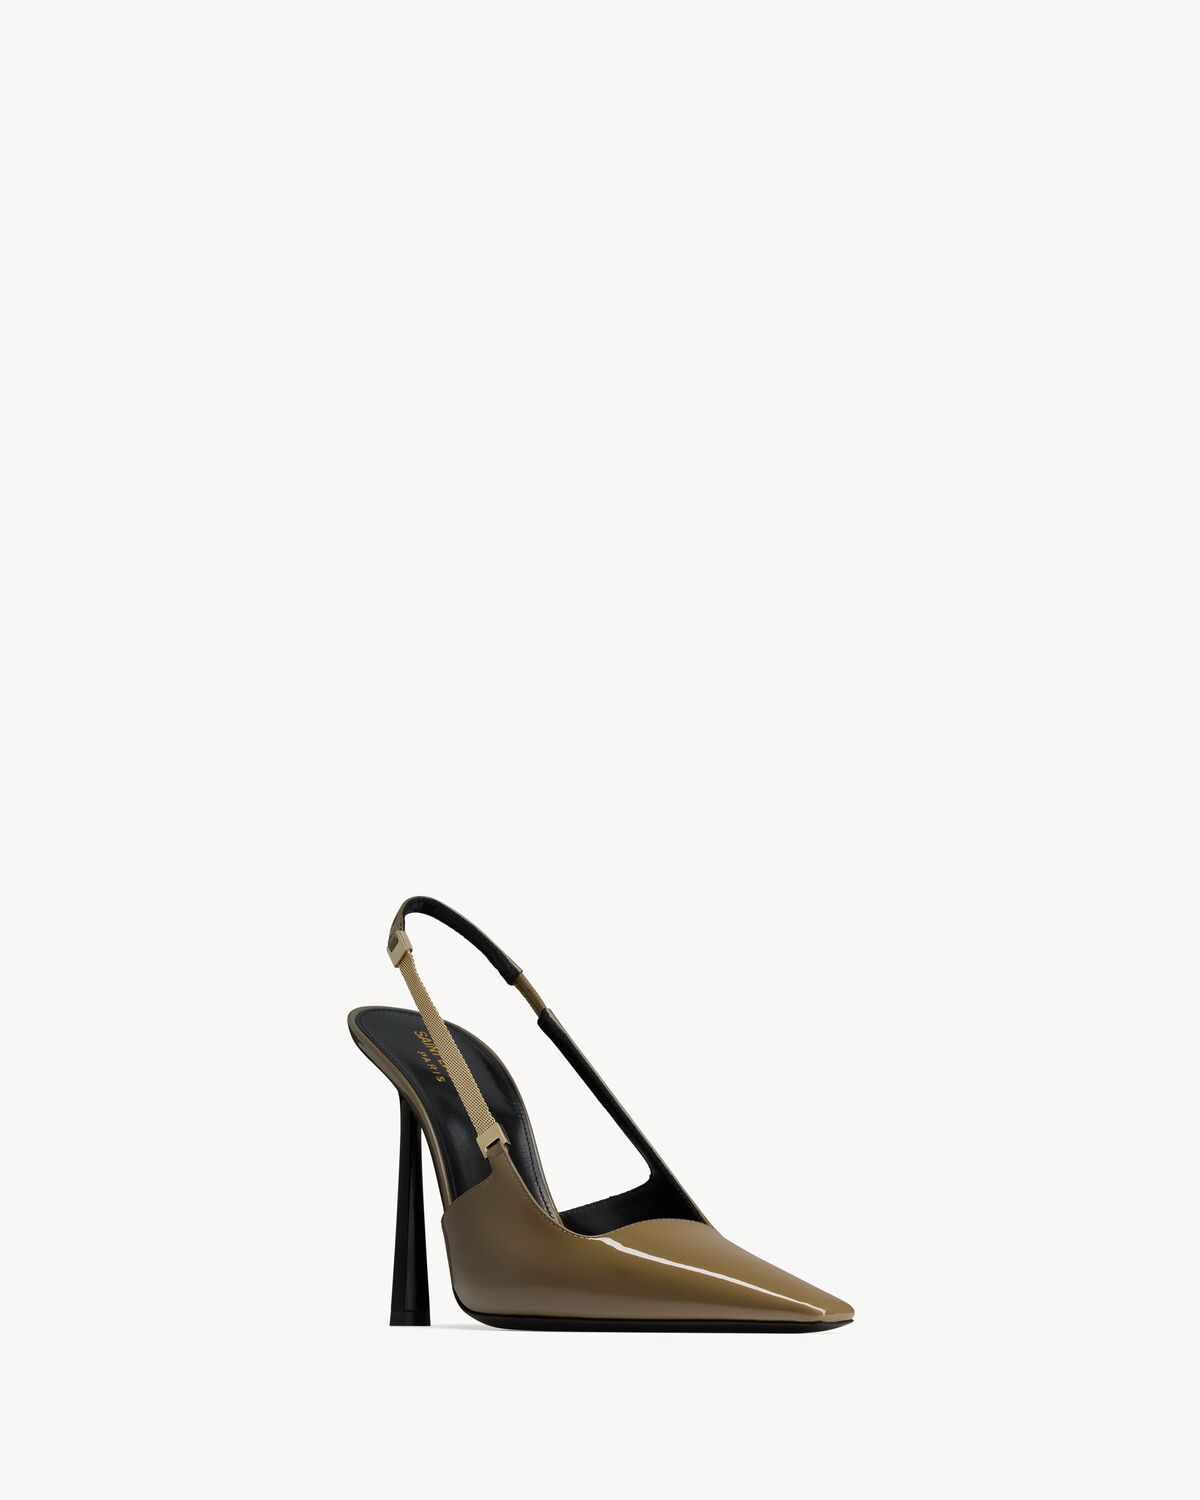 BLAKE slingback pumps in patent leather